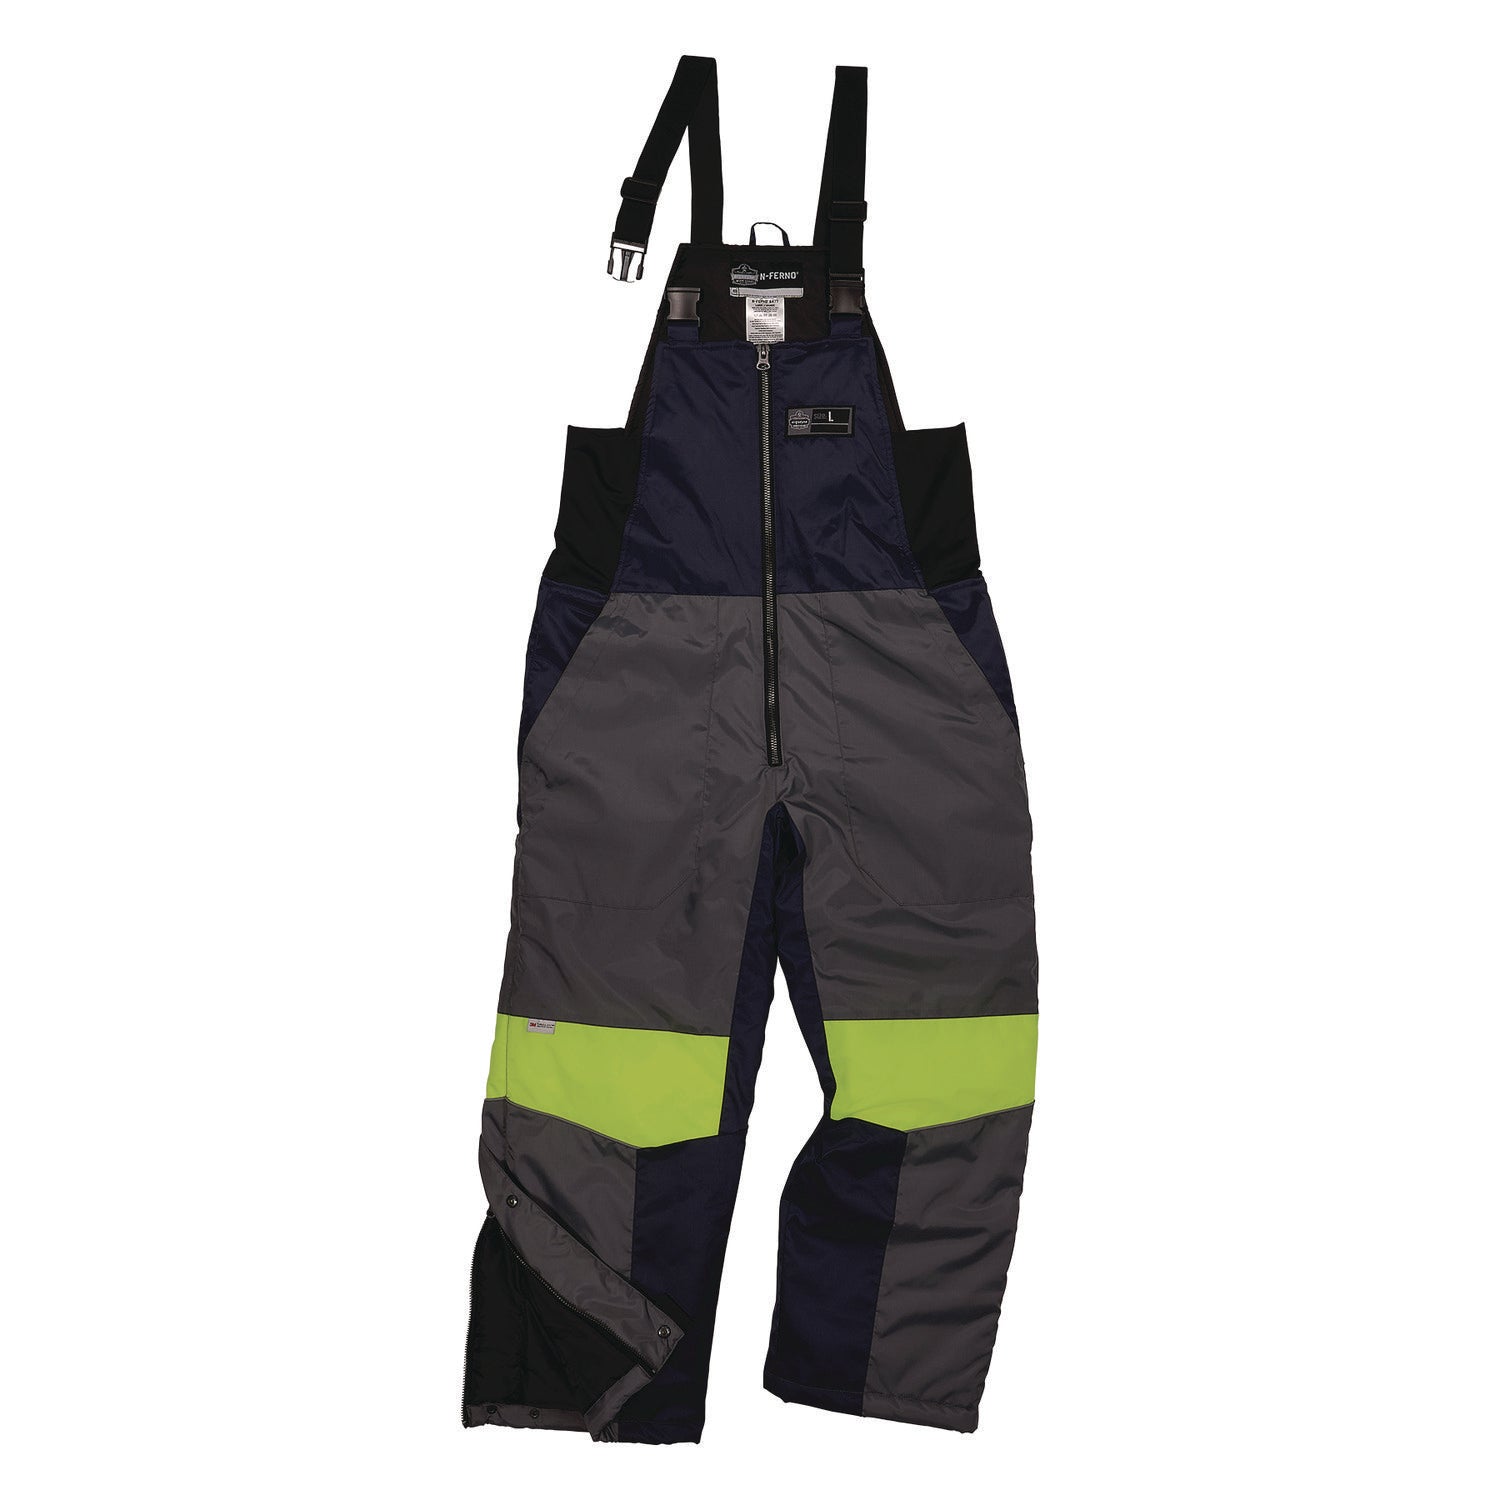 n-ferno-6477-insulated-cooler-bib-overall-medium-navy-ships-in-1-3-business-days_ego41263 - 1